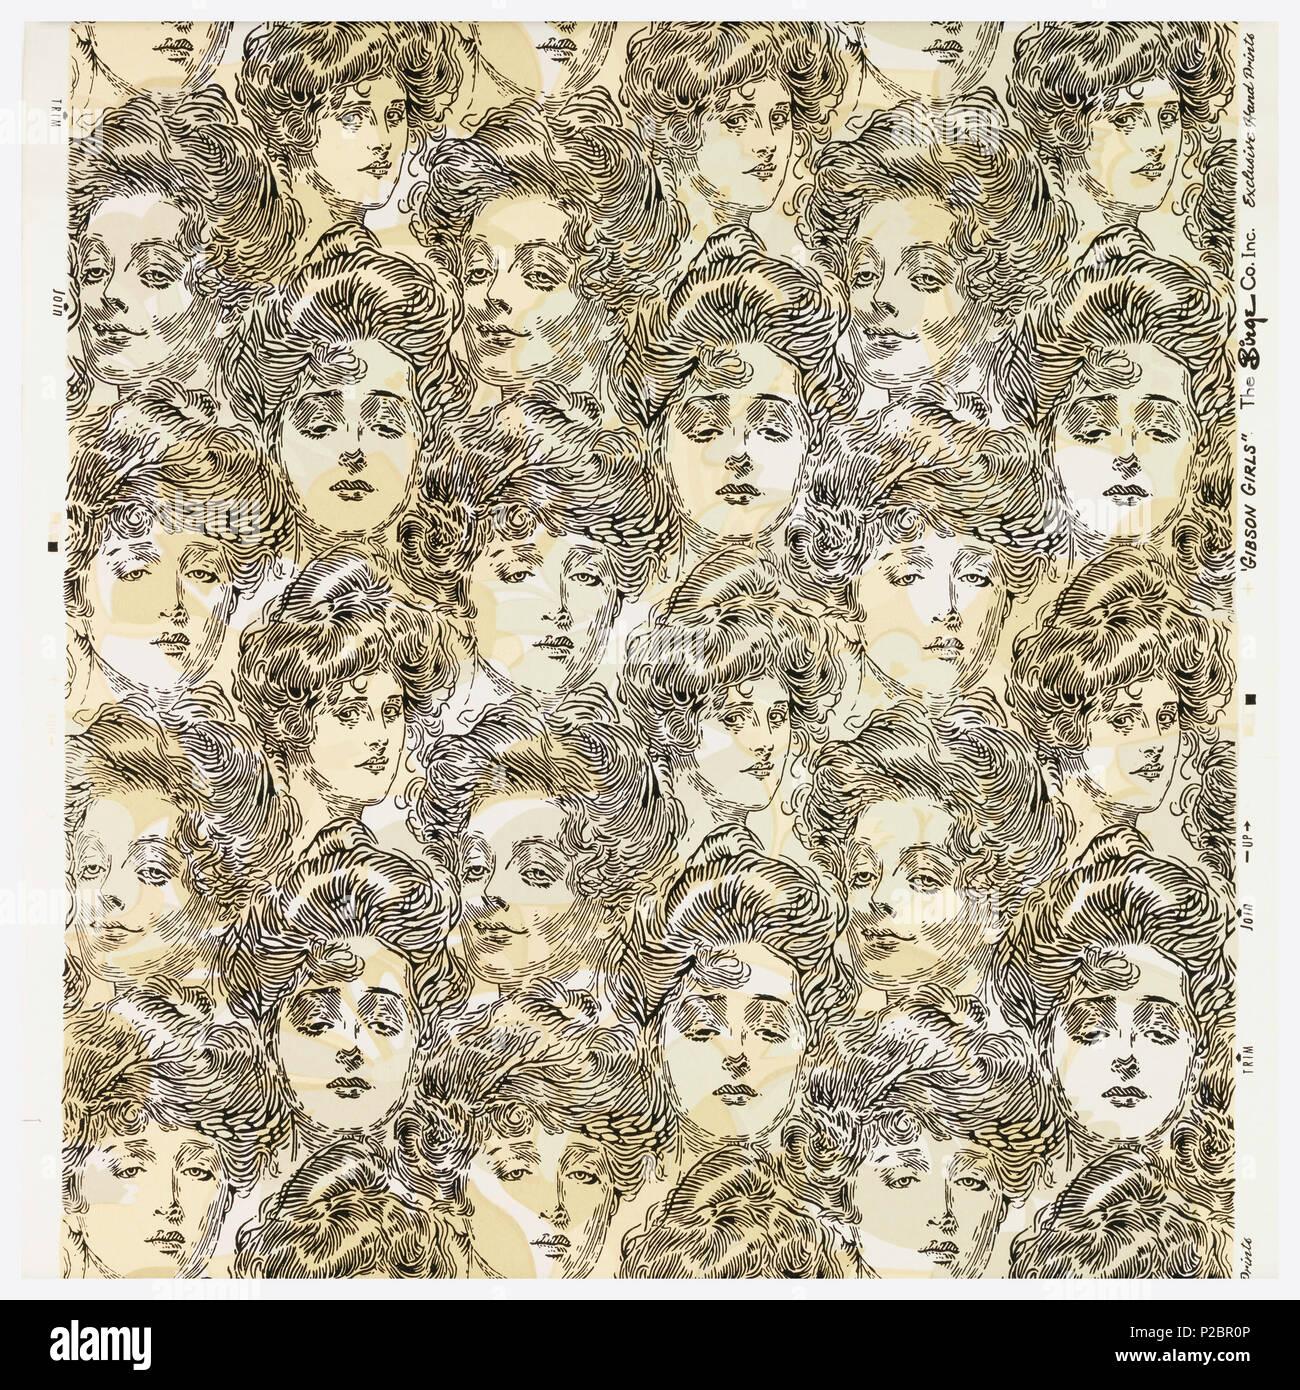 .  English: Sidewall, Bachelor's Wall Paper, 1902 .  English: Repeating pattern containing the faces of Charles Dana Gibson's unmistakable 'Gibson Girls'. a) The faces are printed in black with light blue patches of color for the hair, on an off-white ground. 'a' is machine printed; b) a 1969 Birge reproduction of the original. Same design as 'a' but reversed and slightly larger scale. The faces are printed in black over a possibly 3 color floral ground having the appearance of camouflage. 'b' is screen printed. . 1902 292 Sidewall, Bachelor's Wall Paper, 1902 (CH 18475233-2) Stock Photo